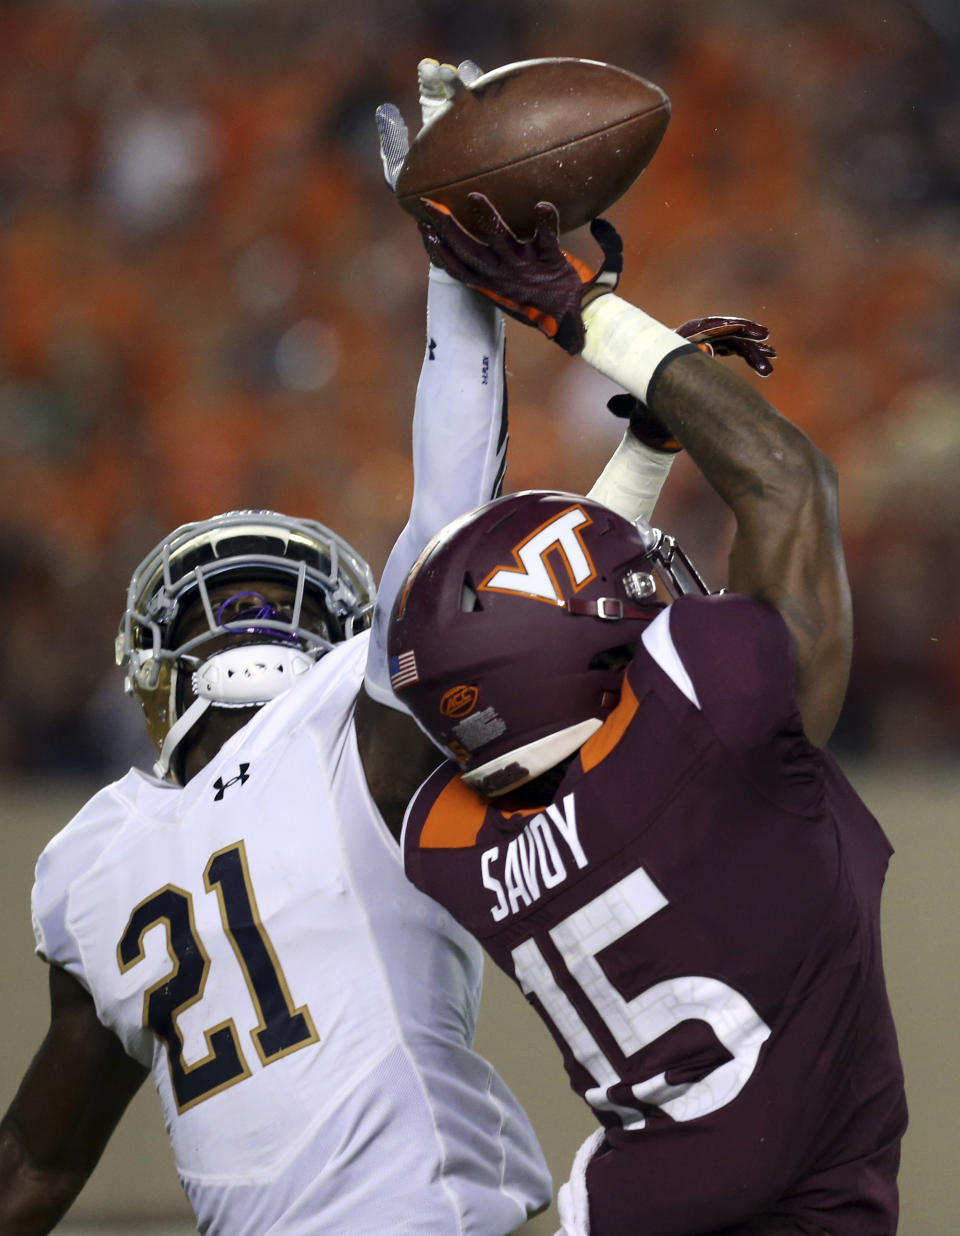 FILE - In this Oct. 6, 2018, file photo, Virginia Tech wide receiver Sean Savoy (15) has a pass from quarterback Ryan Willis (5) knocked away by Notre Dame defender Jalen Elliott (21) during the first half of an NCAA college football game in Blacksburg, Va. Notre Dame safeties Alohi Gilman and Jalen Elliott had 162 tackles, 12 passes defended and four forced fumbles between them. (Matt Gentry/The Roanoke Times via AP, File)